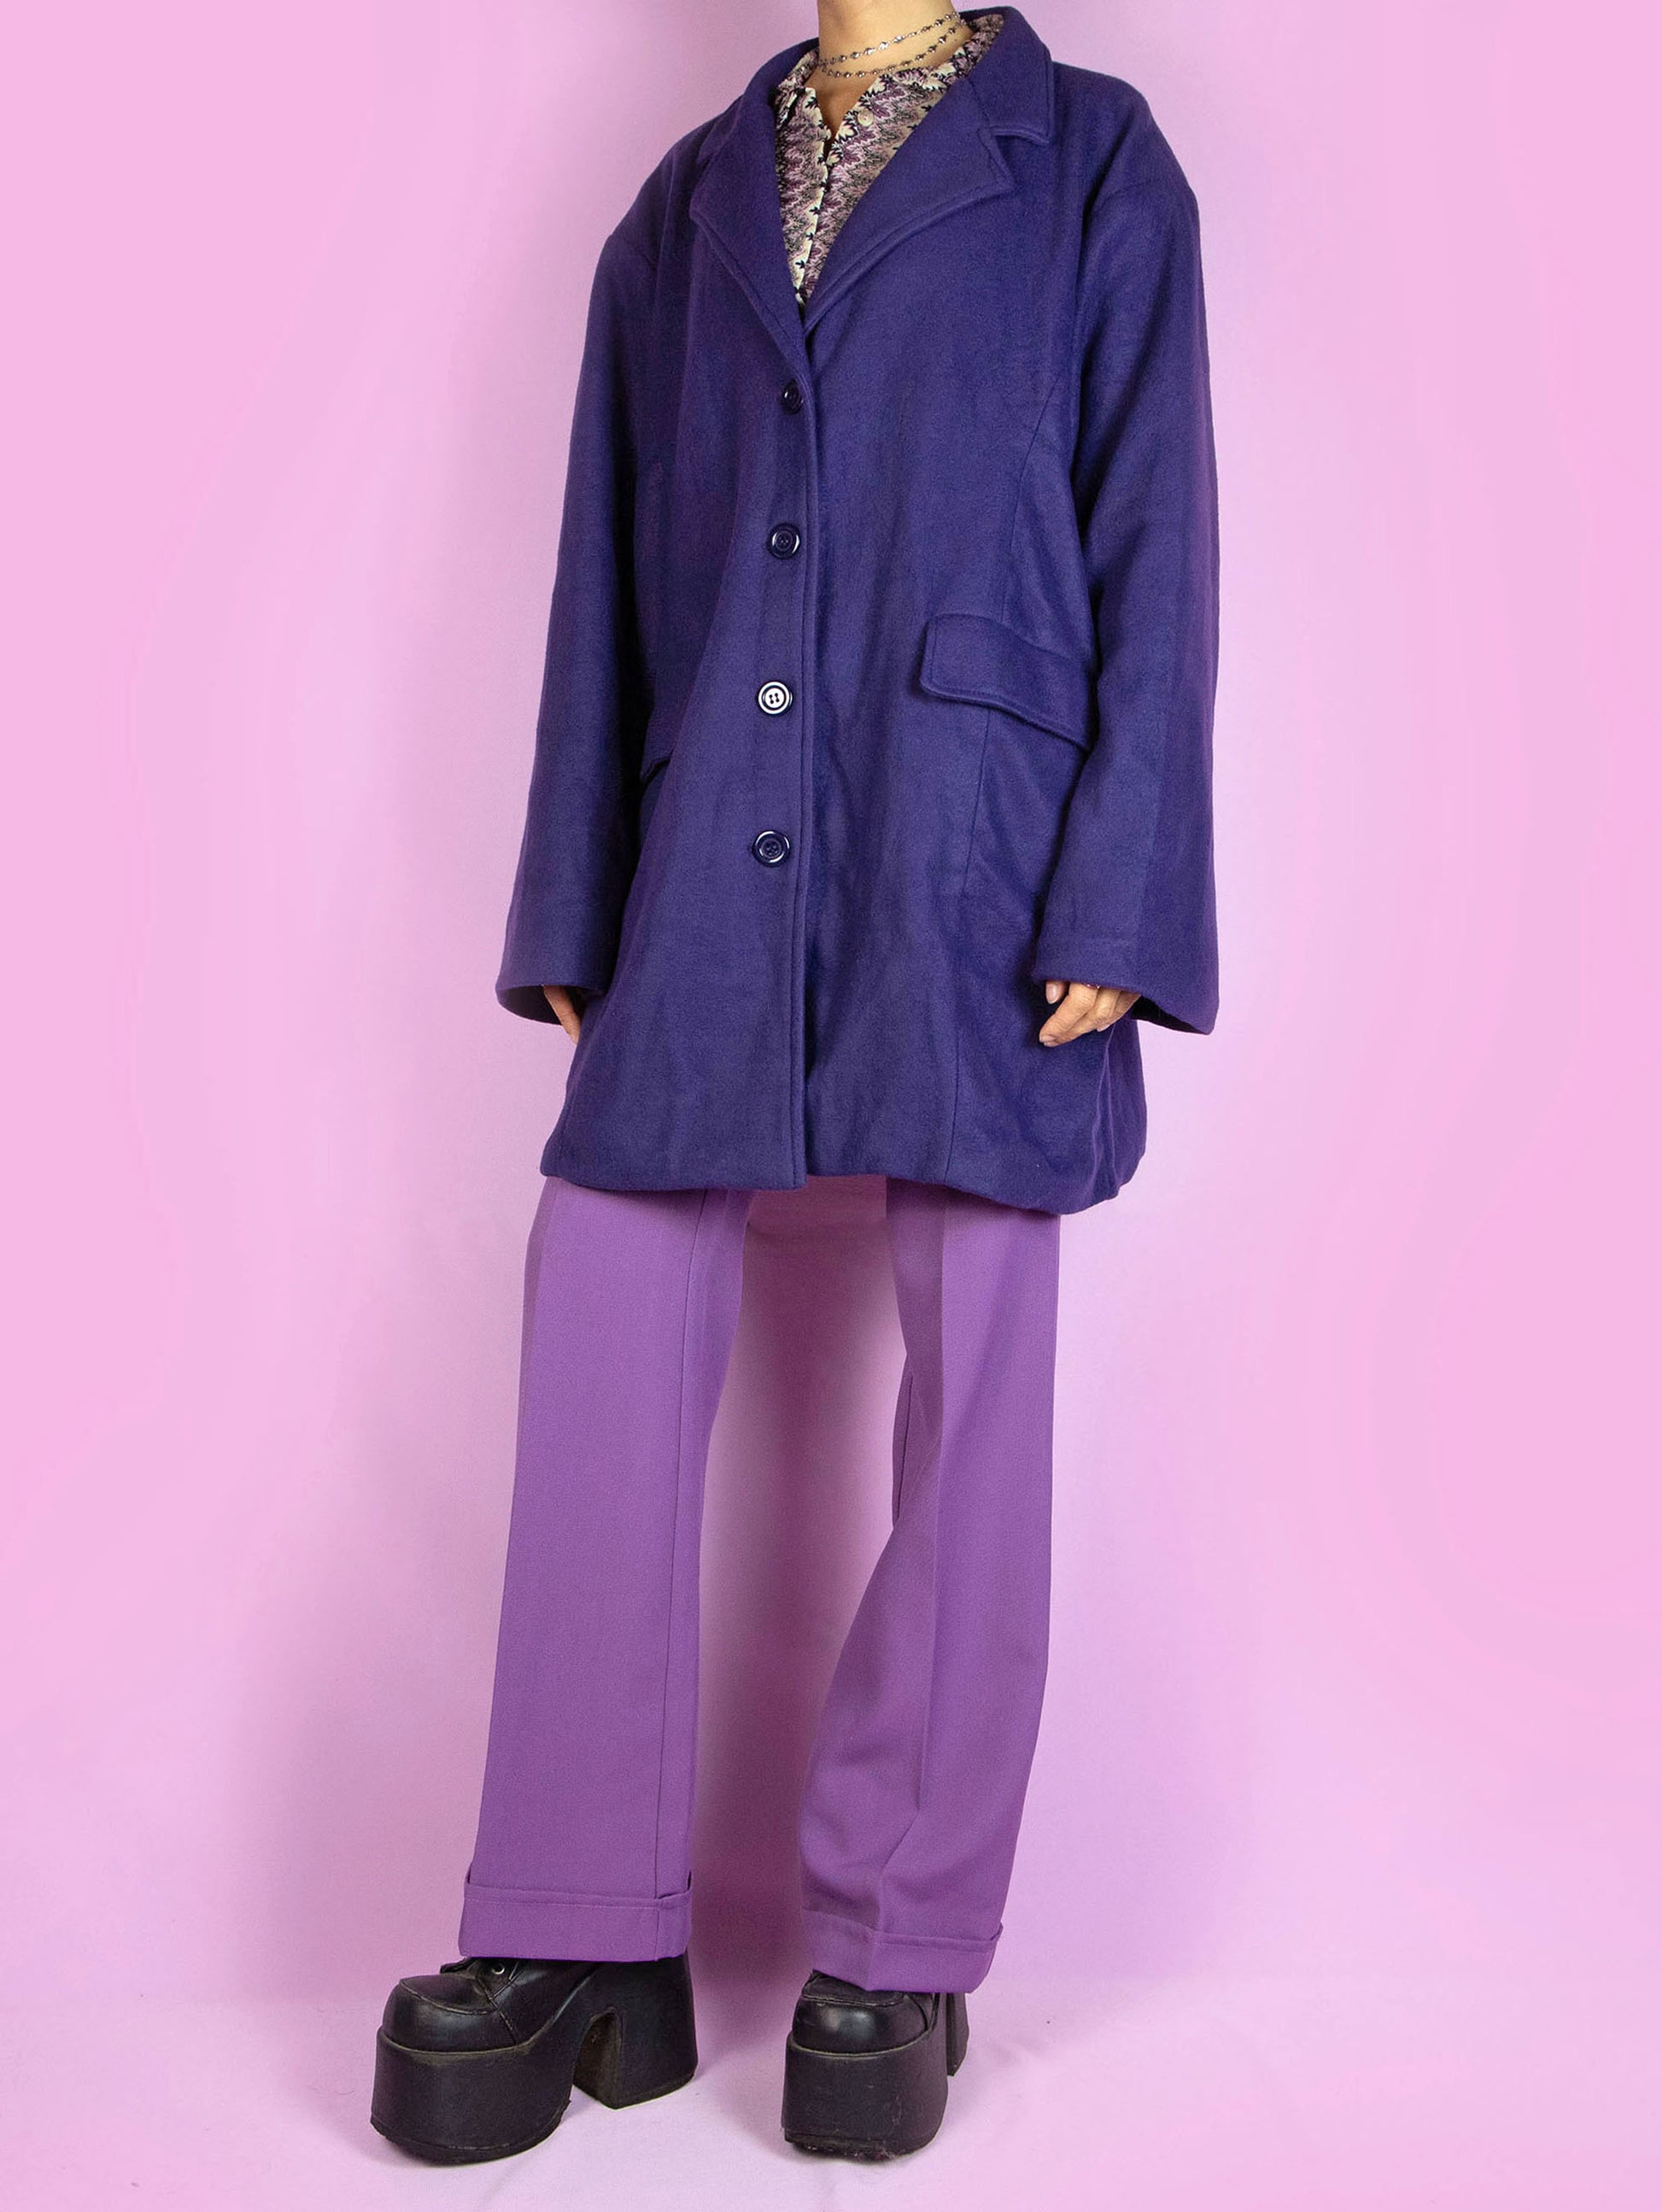 The Y2K Purple Blazer Jacket is a vintage dark purple blazer-style jacket with a collar, pockets, and buttons. Classic preppy 2000s office coat.